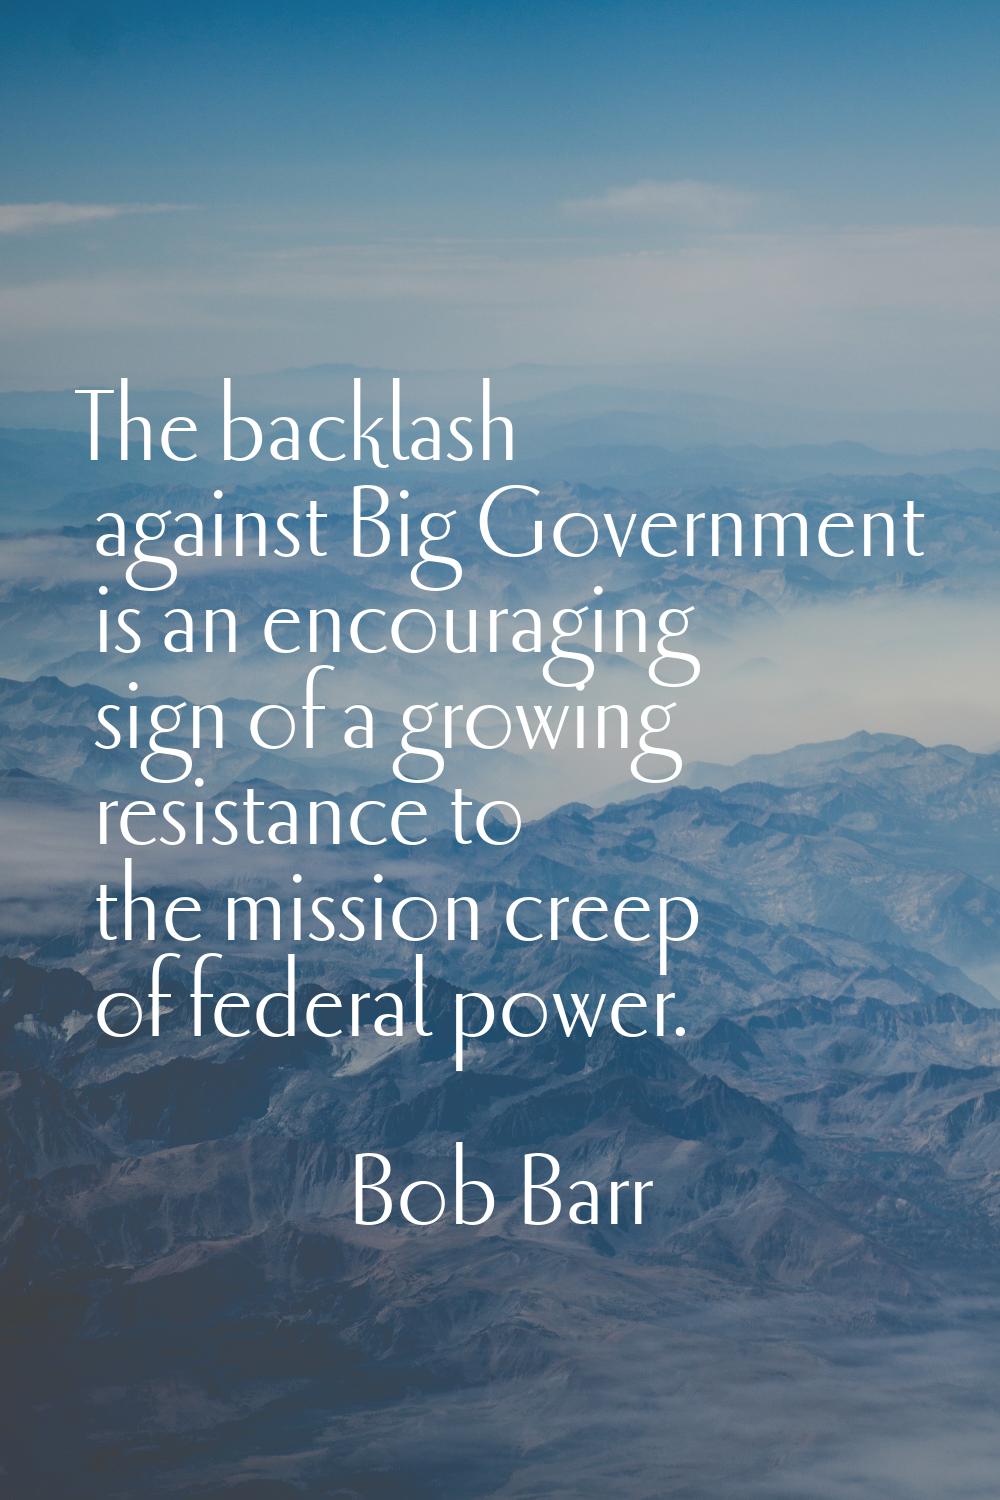 The backlash against Big Government is an encouraging sign of a growing resistance to the mission c